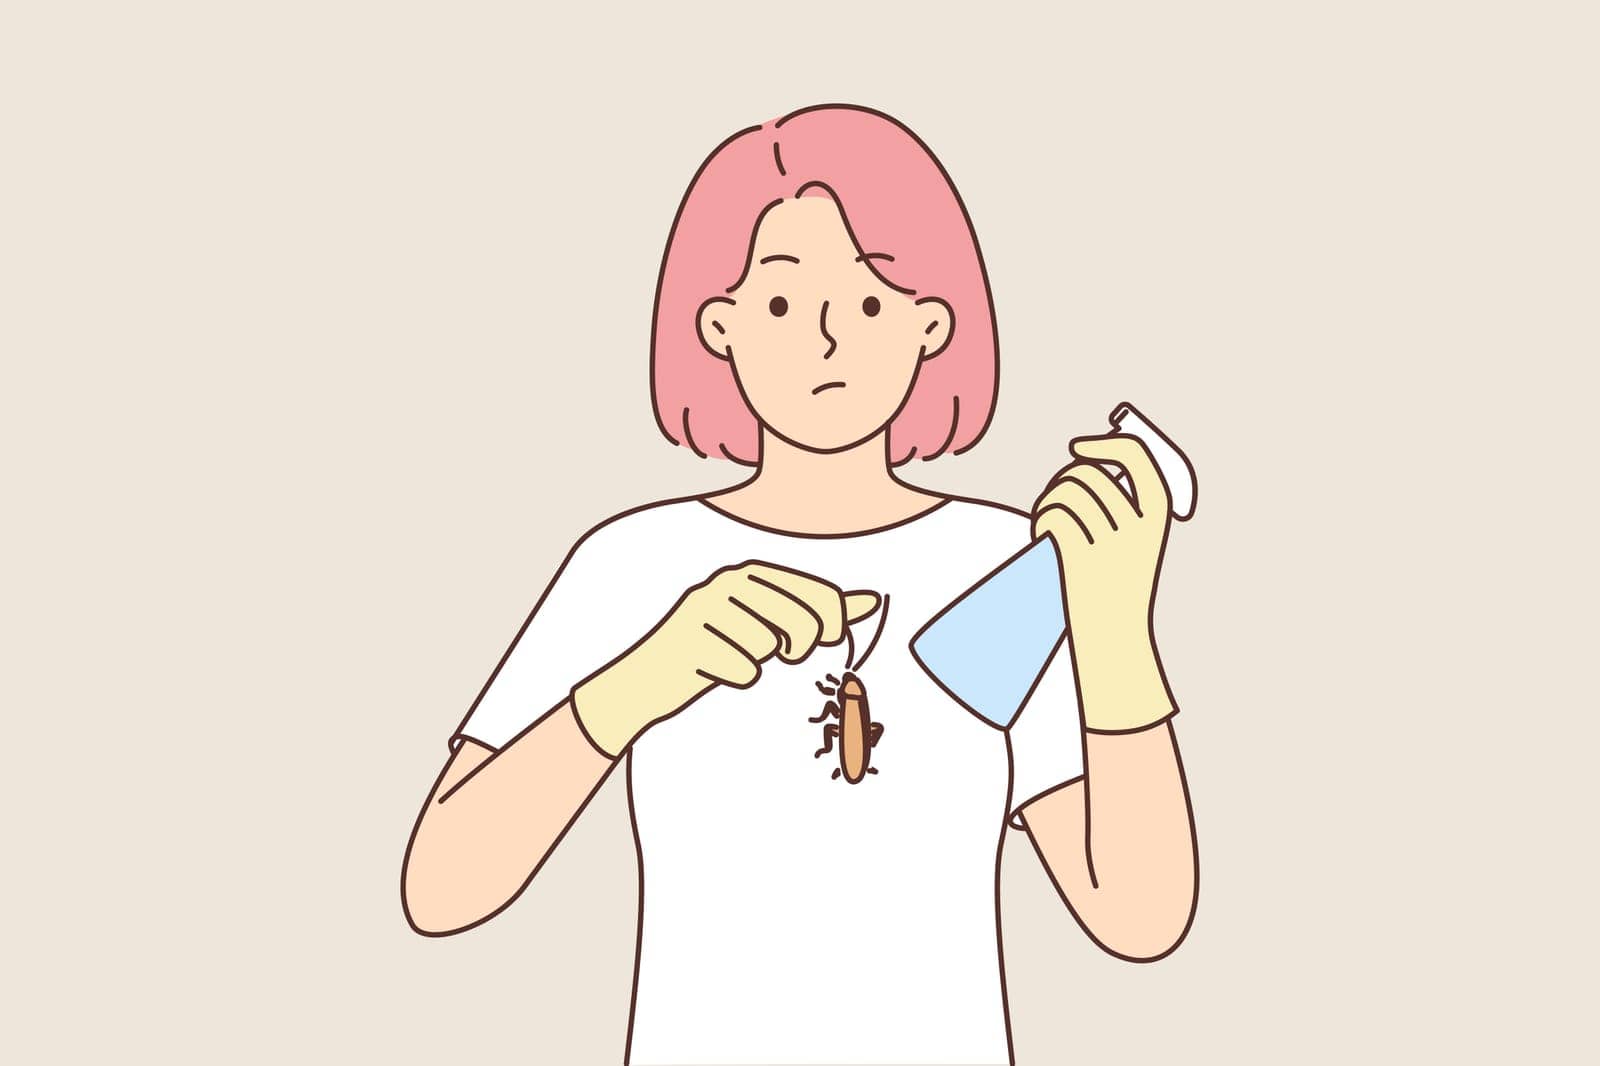 Embarrassed woman holding cockroach and spray bottle with insecticide or pest control. Girl disinfects by destroying cockroach and beetles to avoid spread of infections or unsanitary conditions